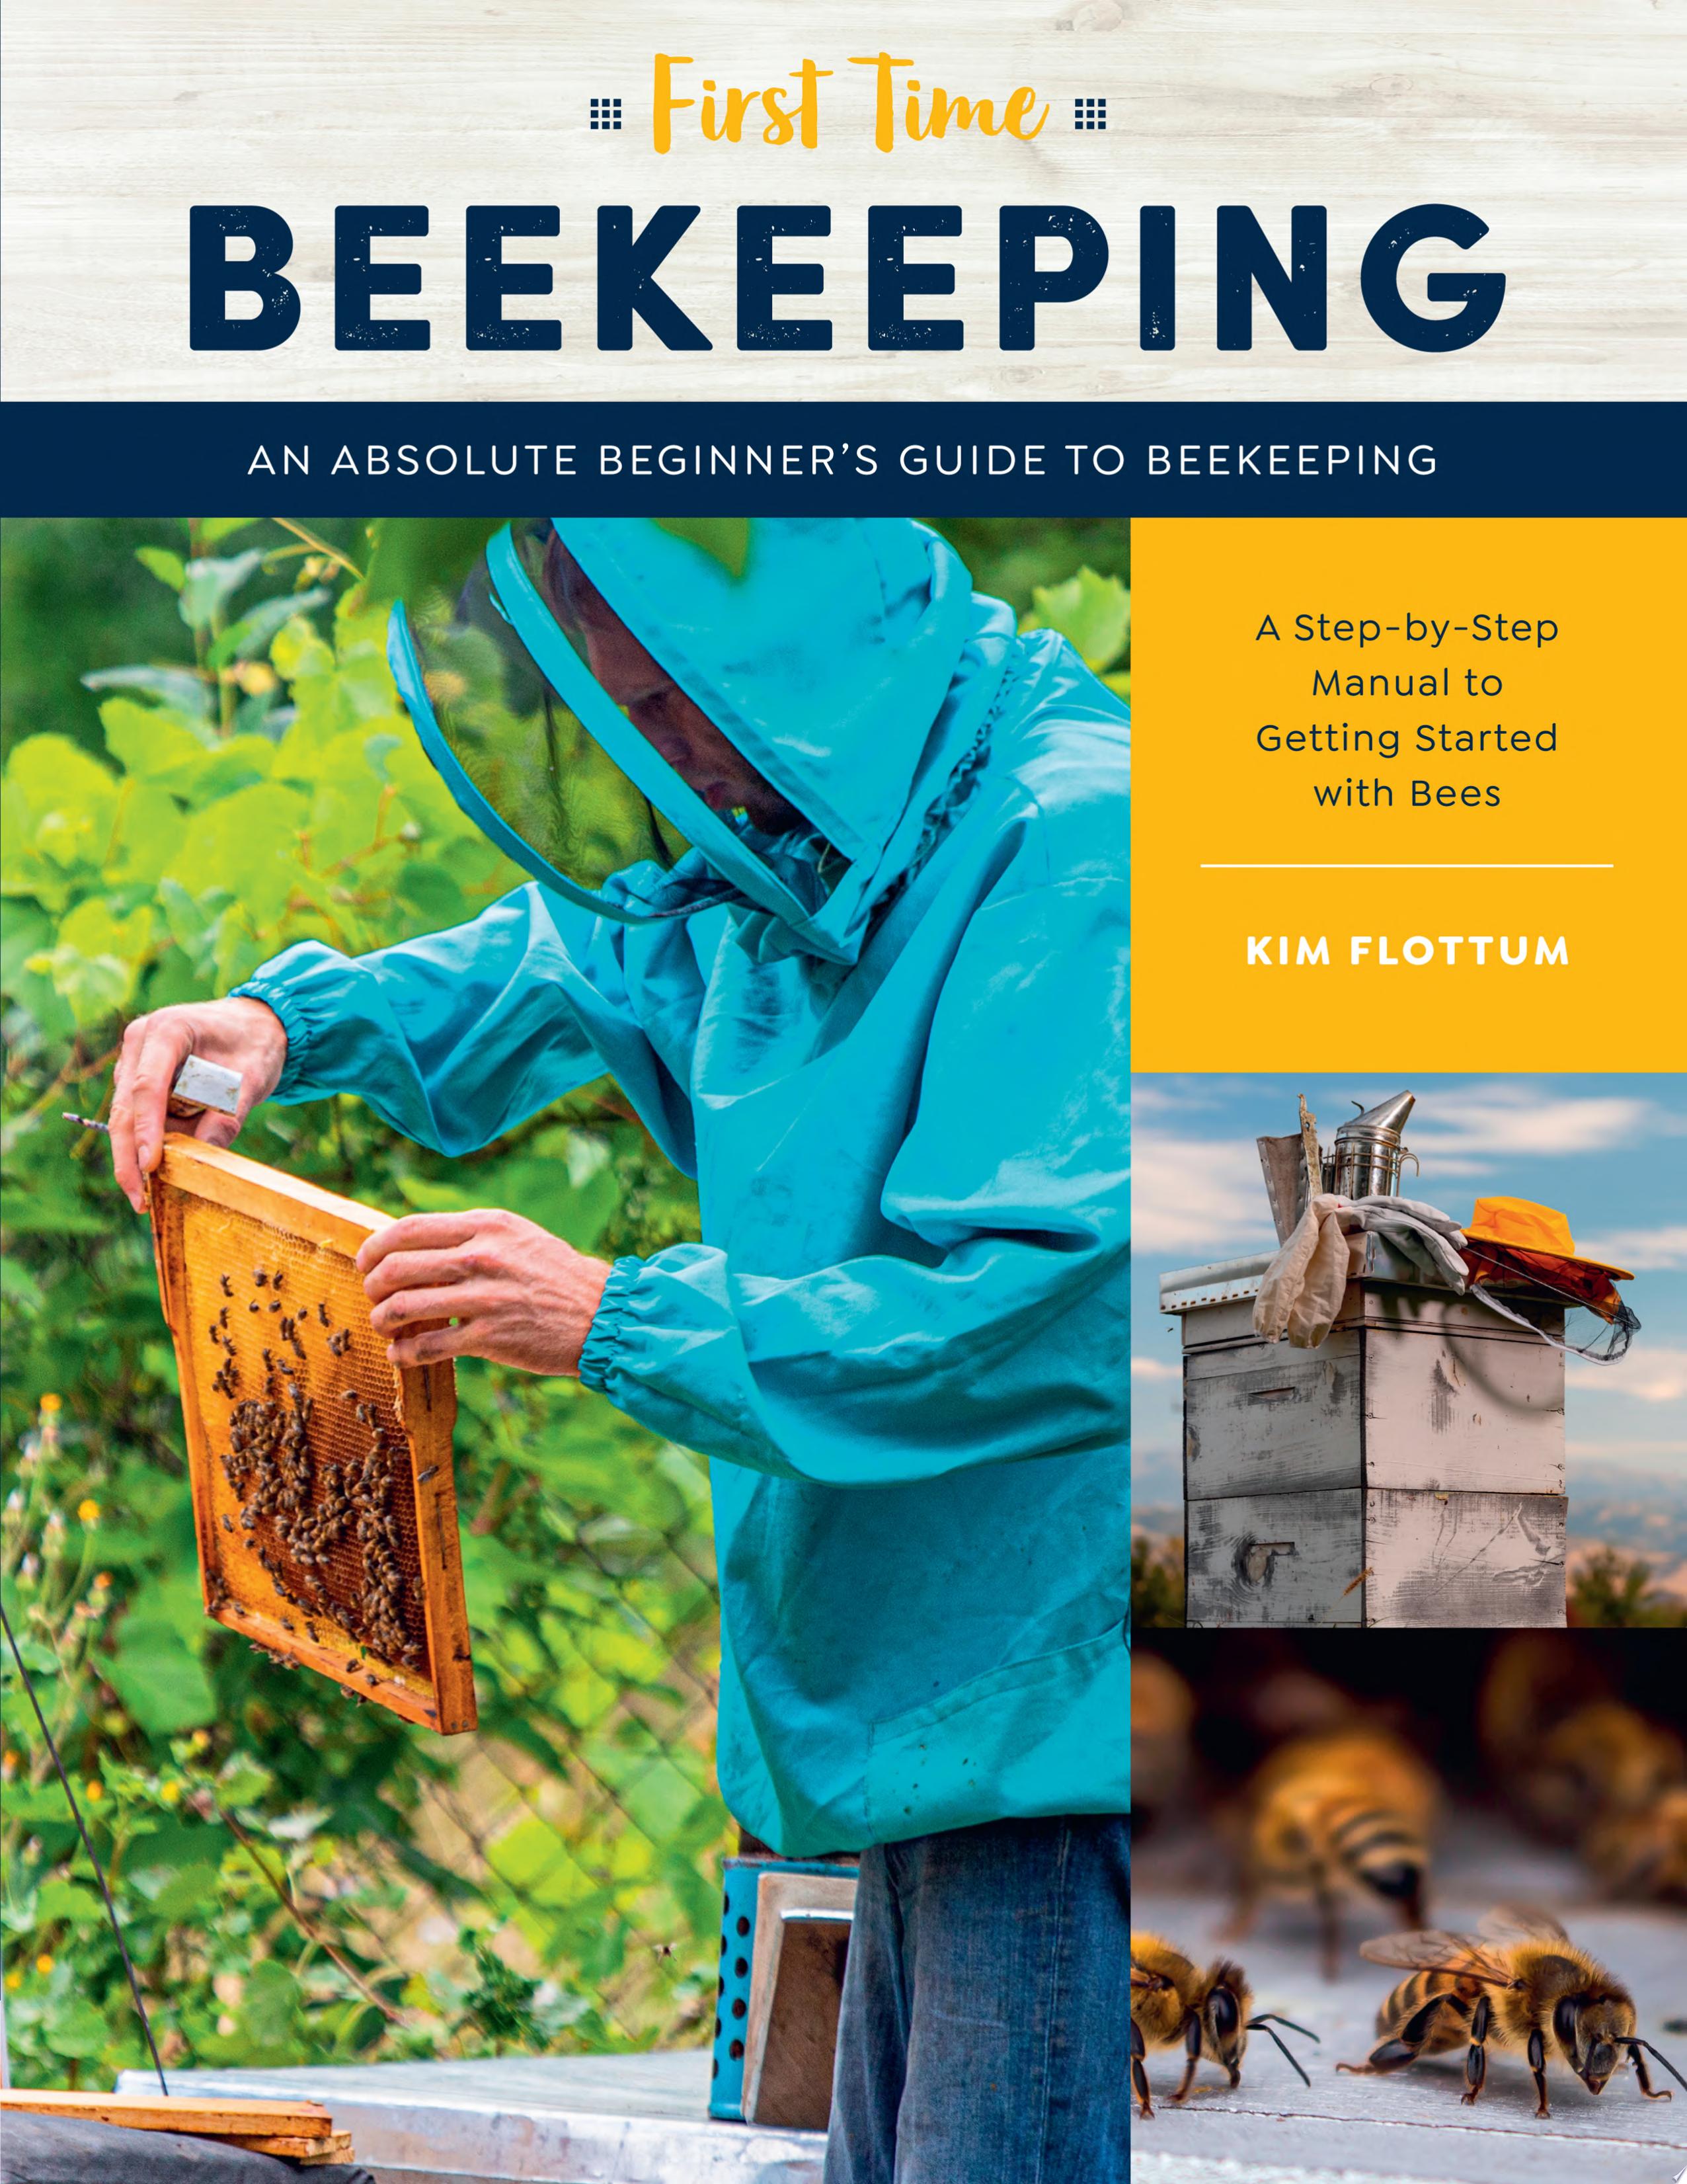 Image for "First Time Beekeeping"